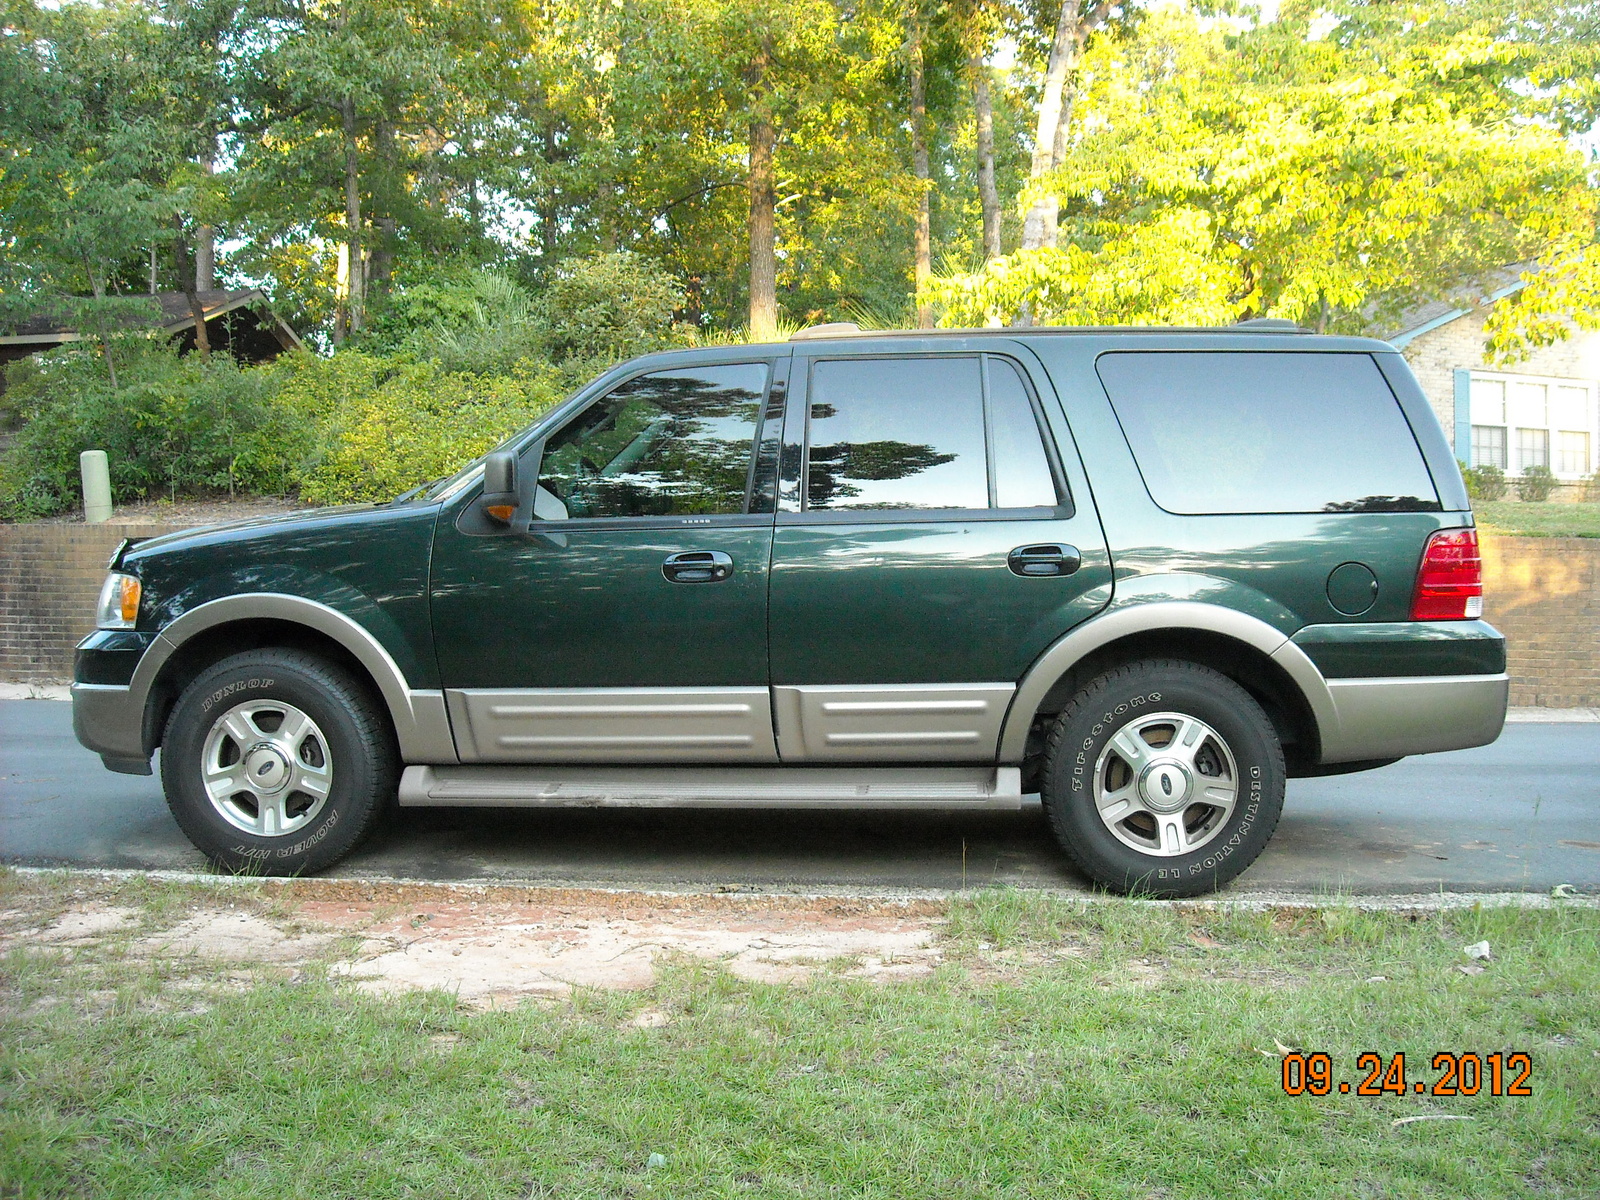 2003 Ford expedition exterior dimensions #8